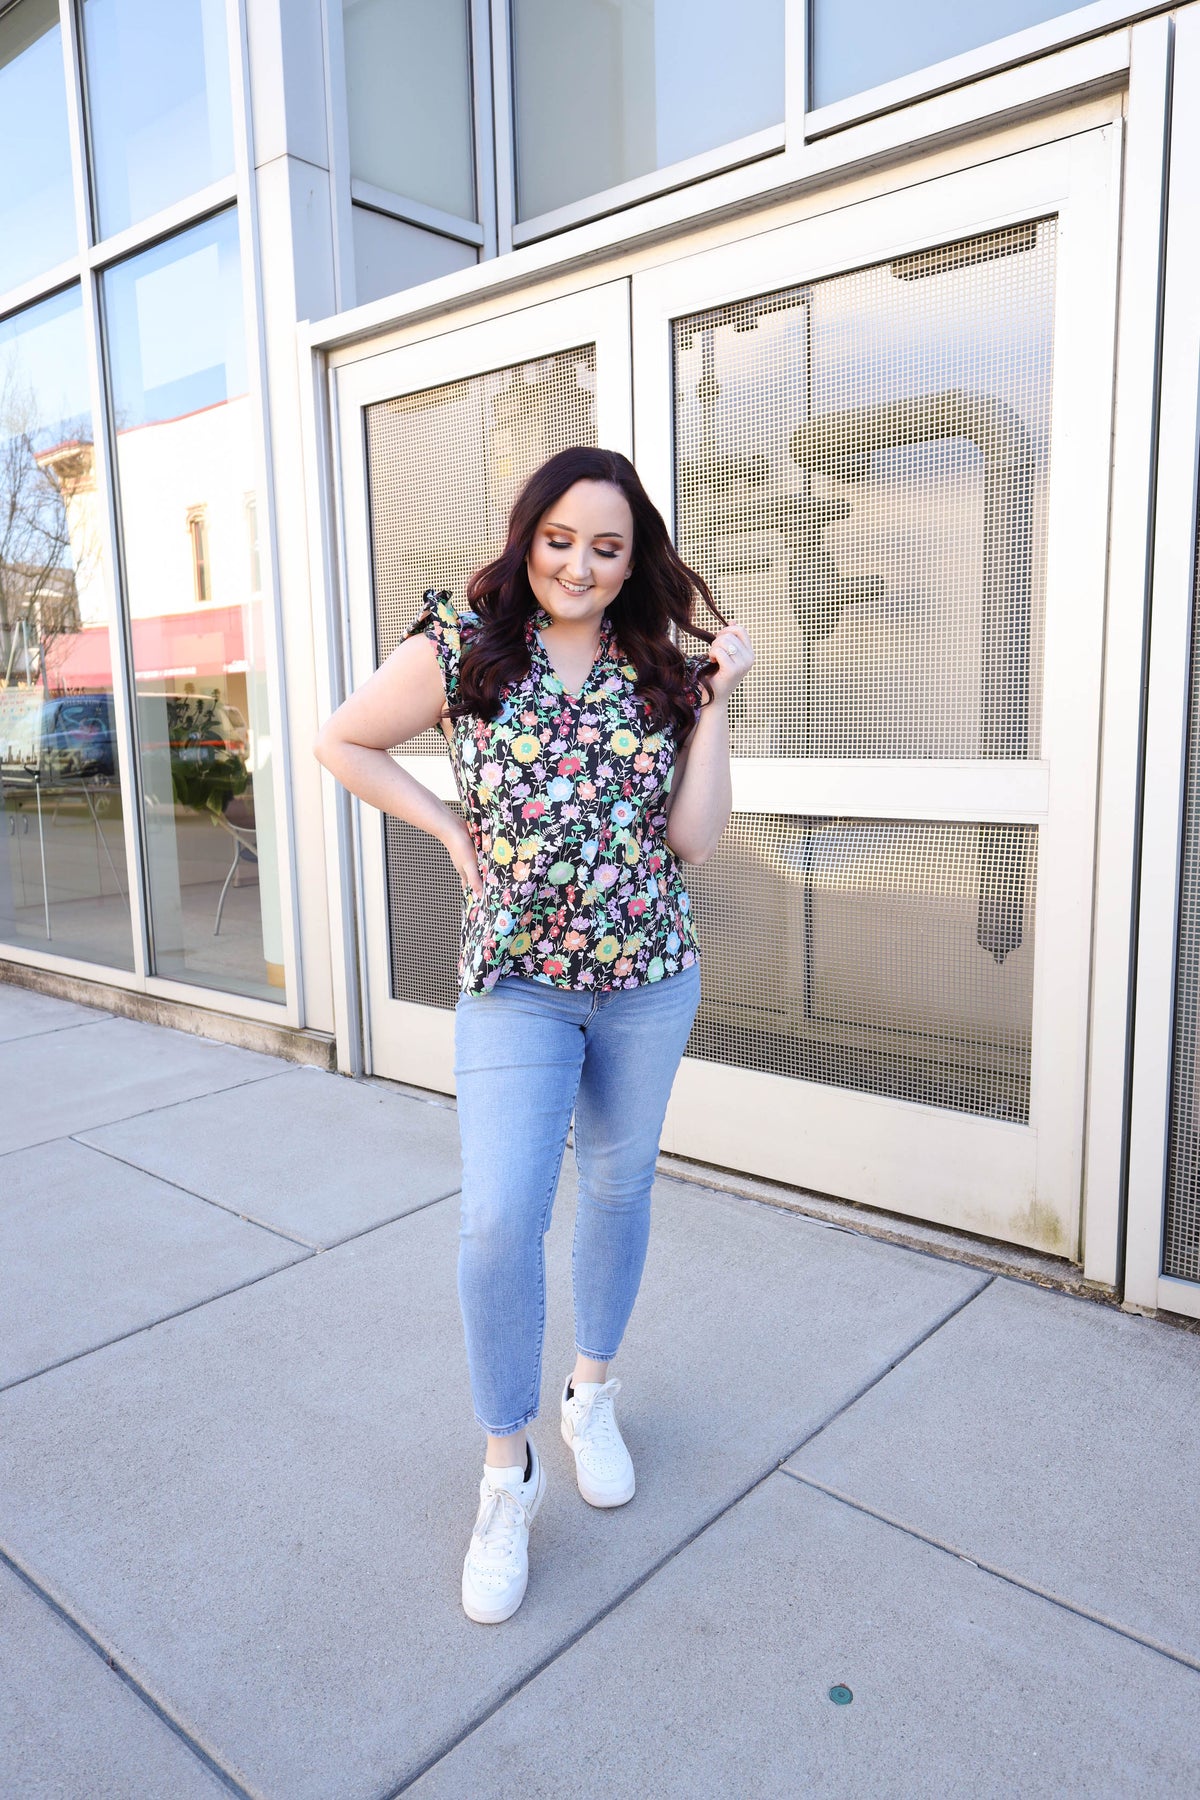 Black and Bright Floral Print Top | Boutique Elise | Lexi Easel